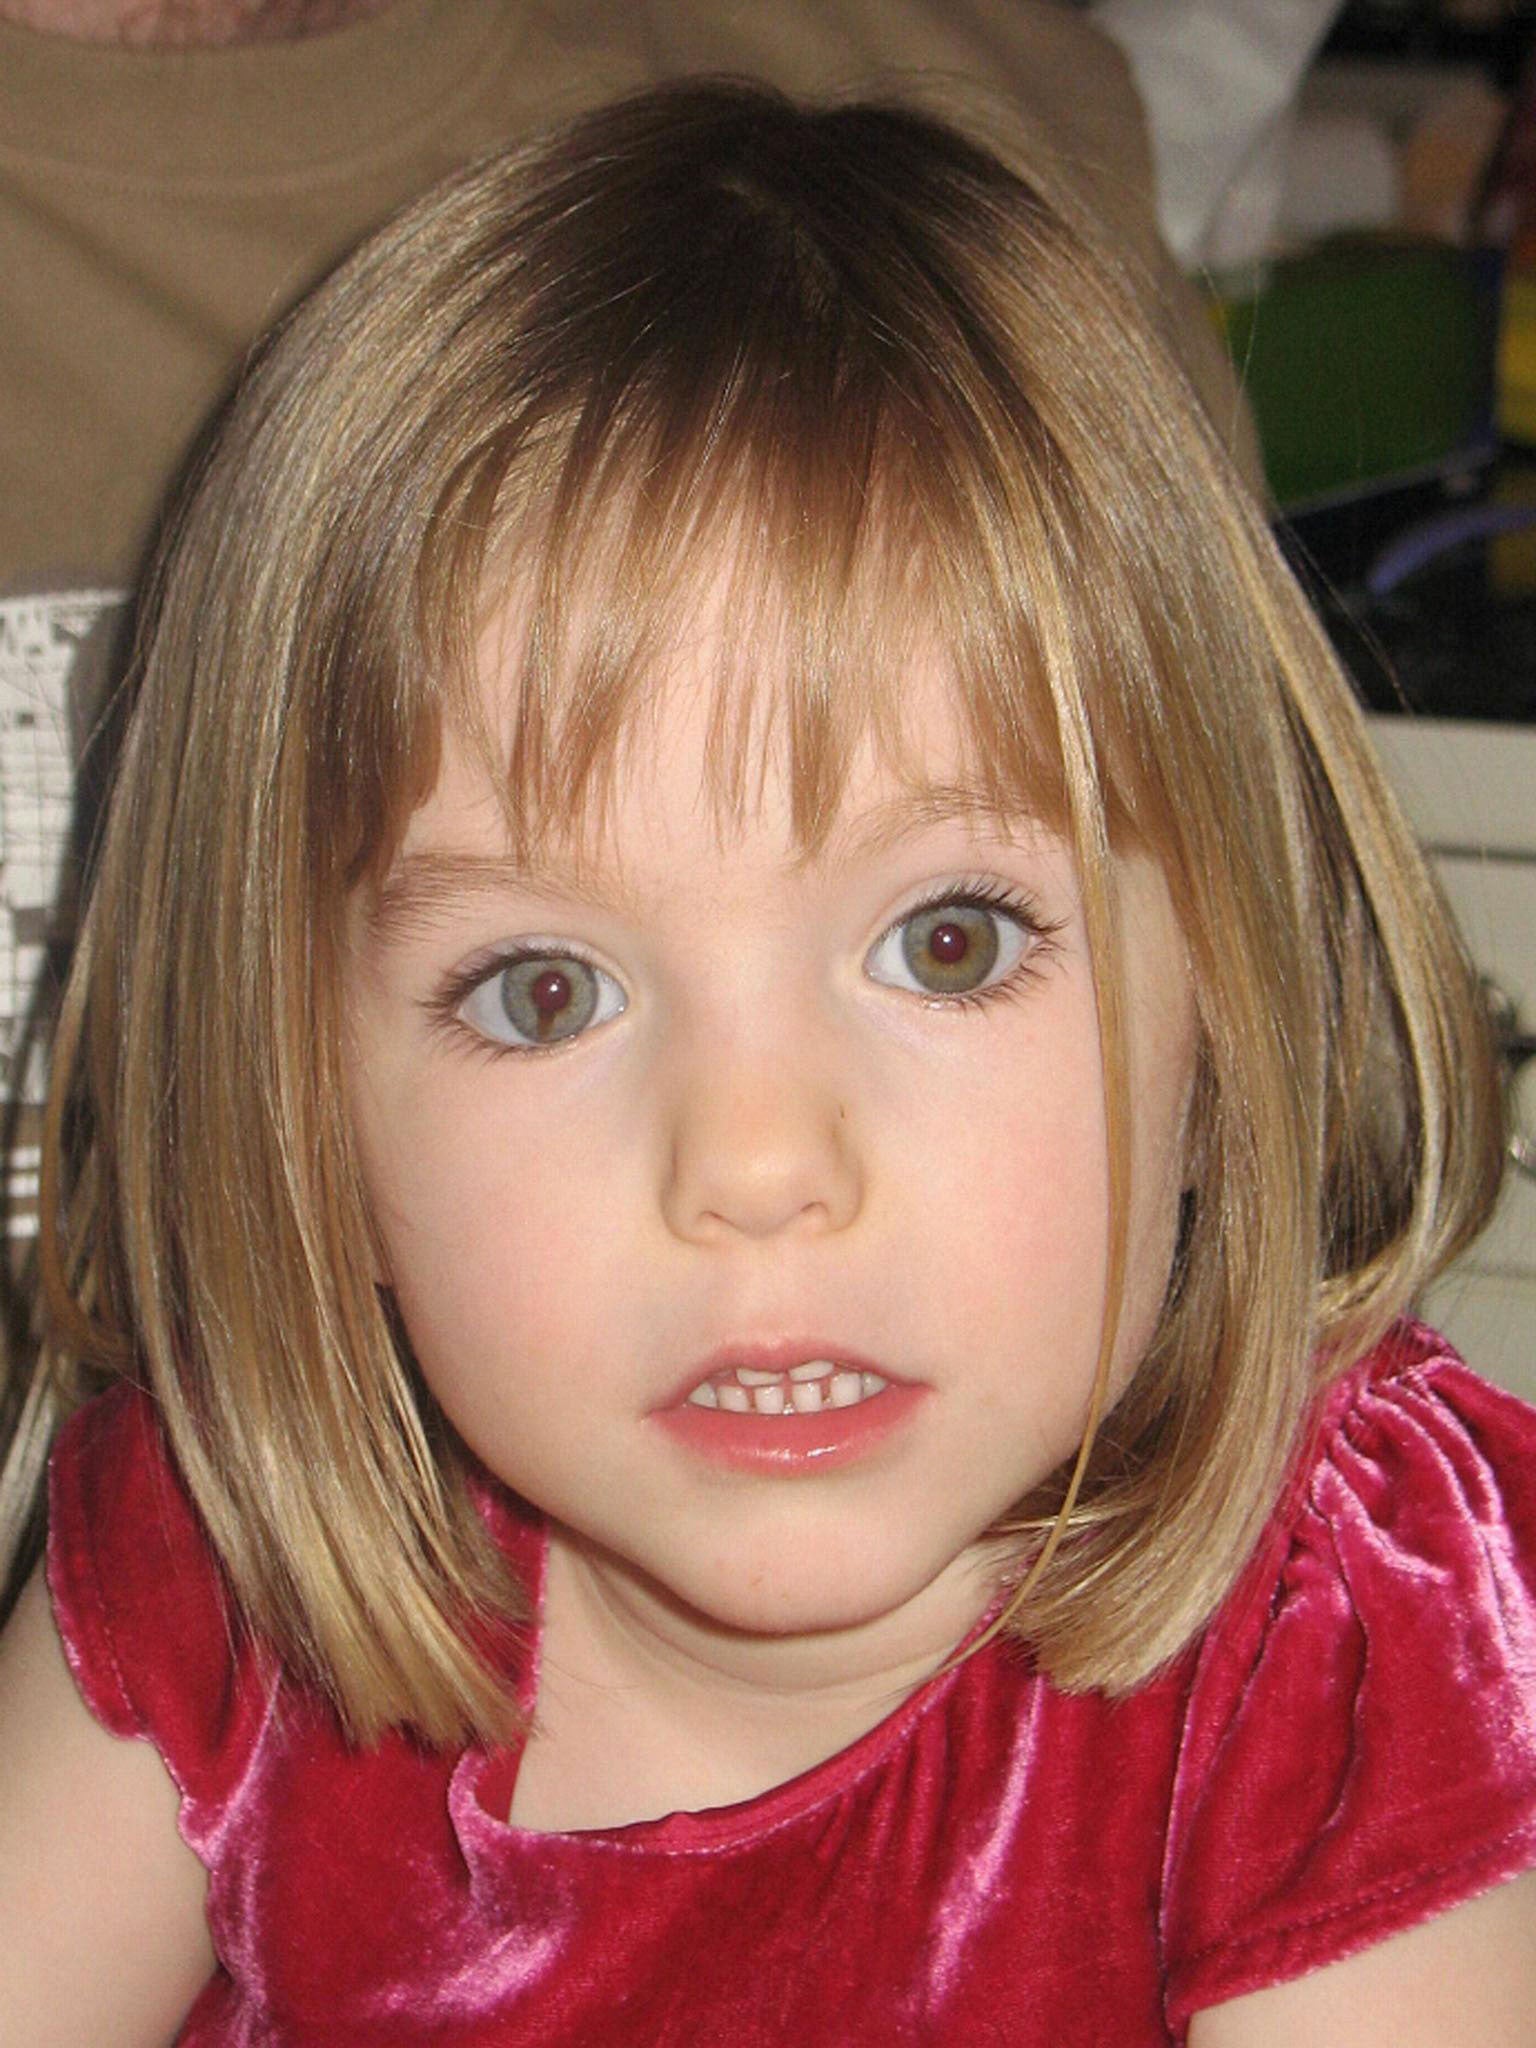 Madeleine McCann was abducted during a family holiday in 2007